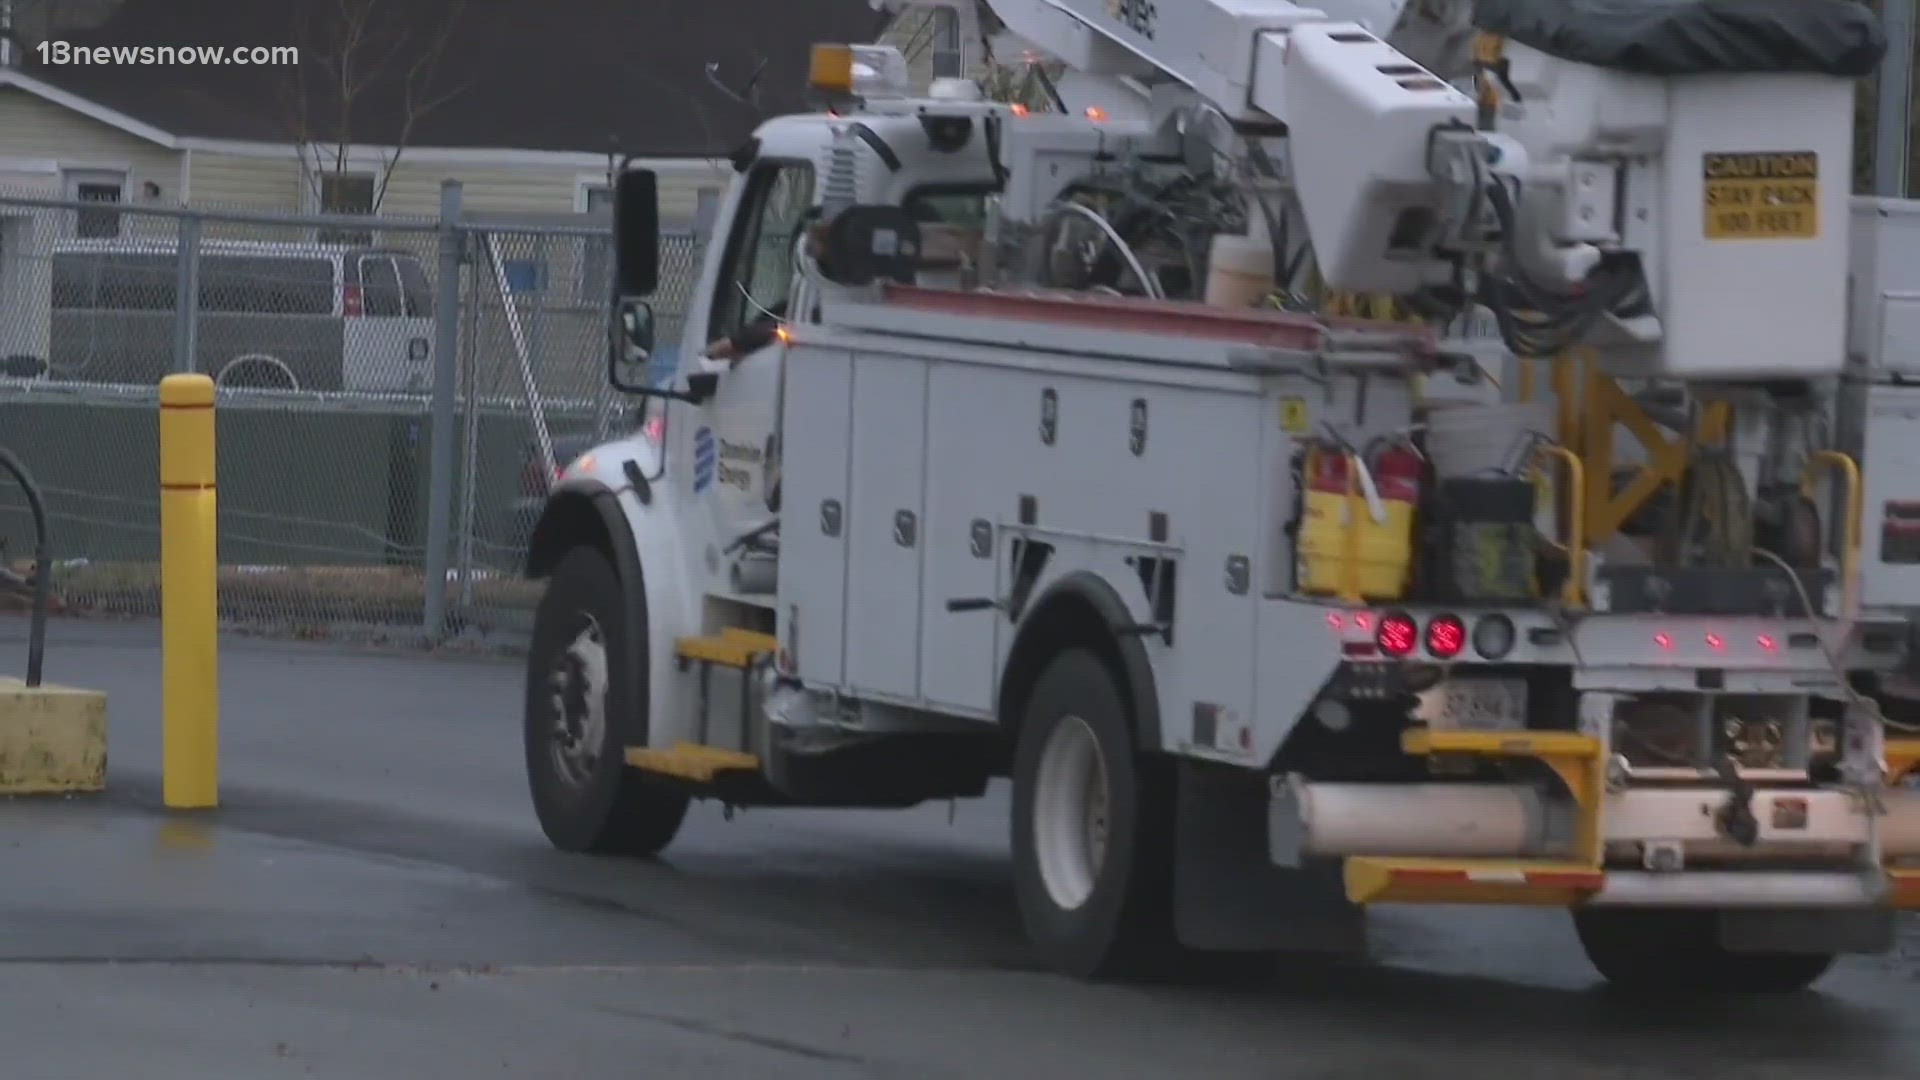 The utility company has deployed hundreds of crews across Hampton Roads, Gloucester, the Outer Banks and several other counties.